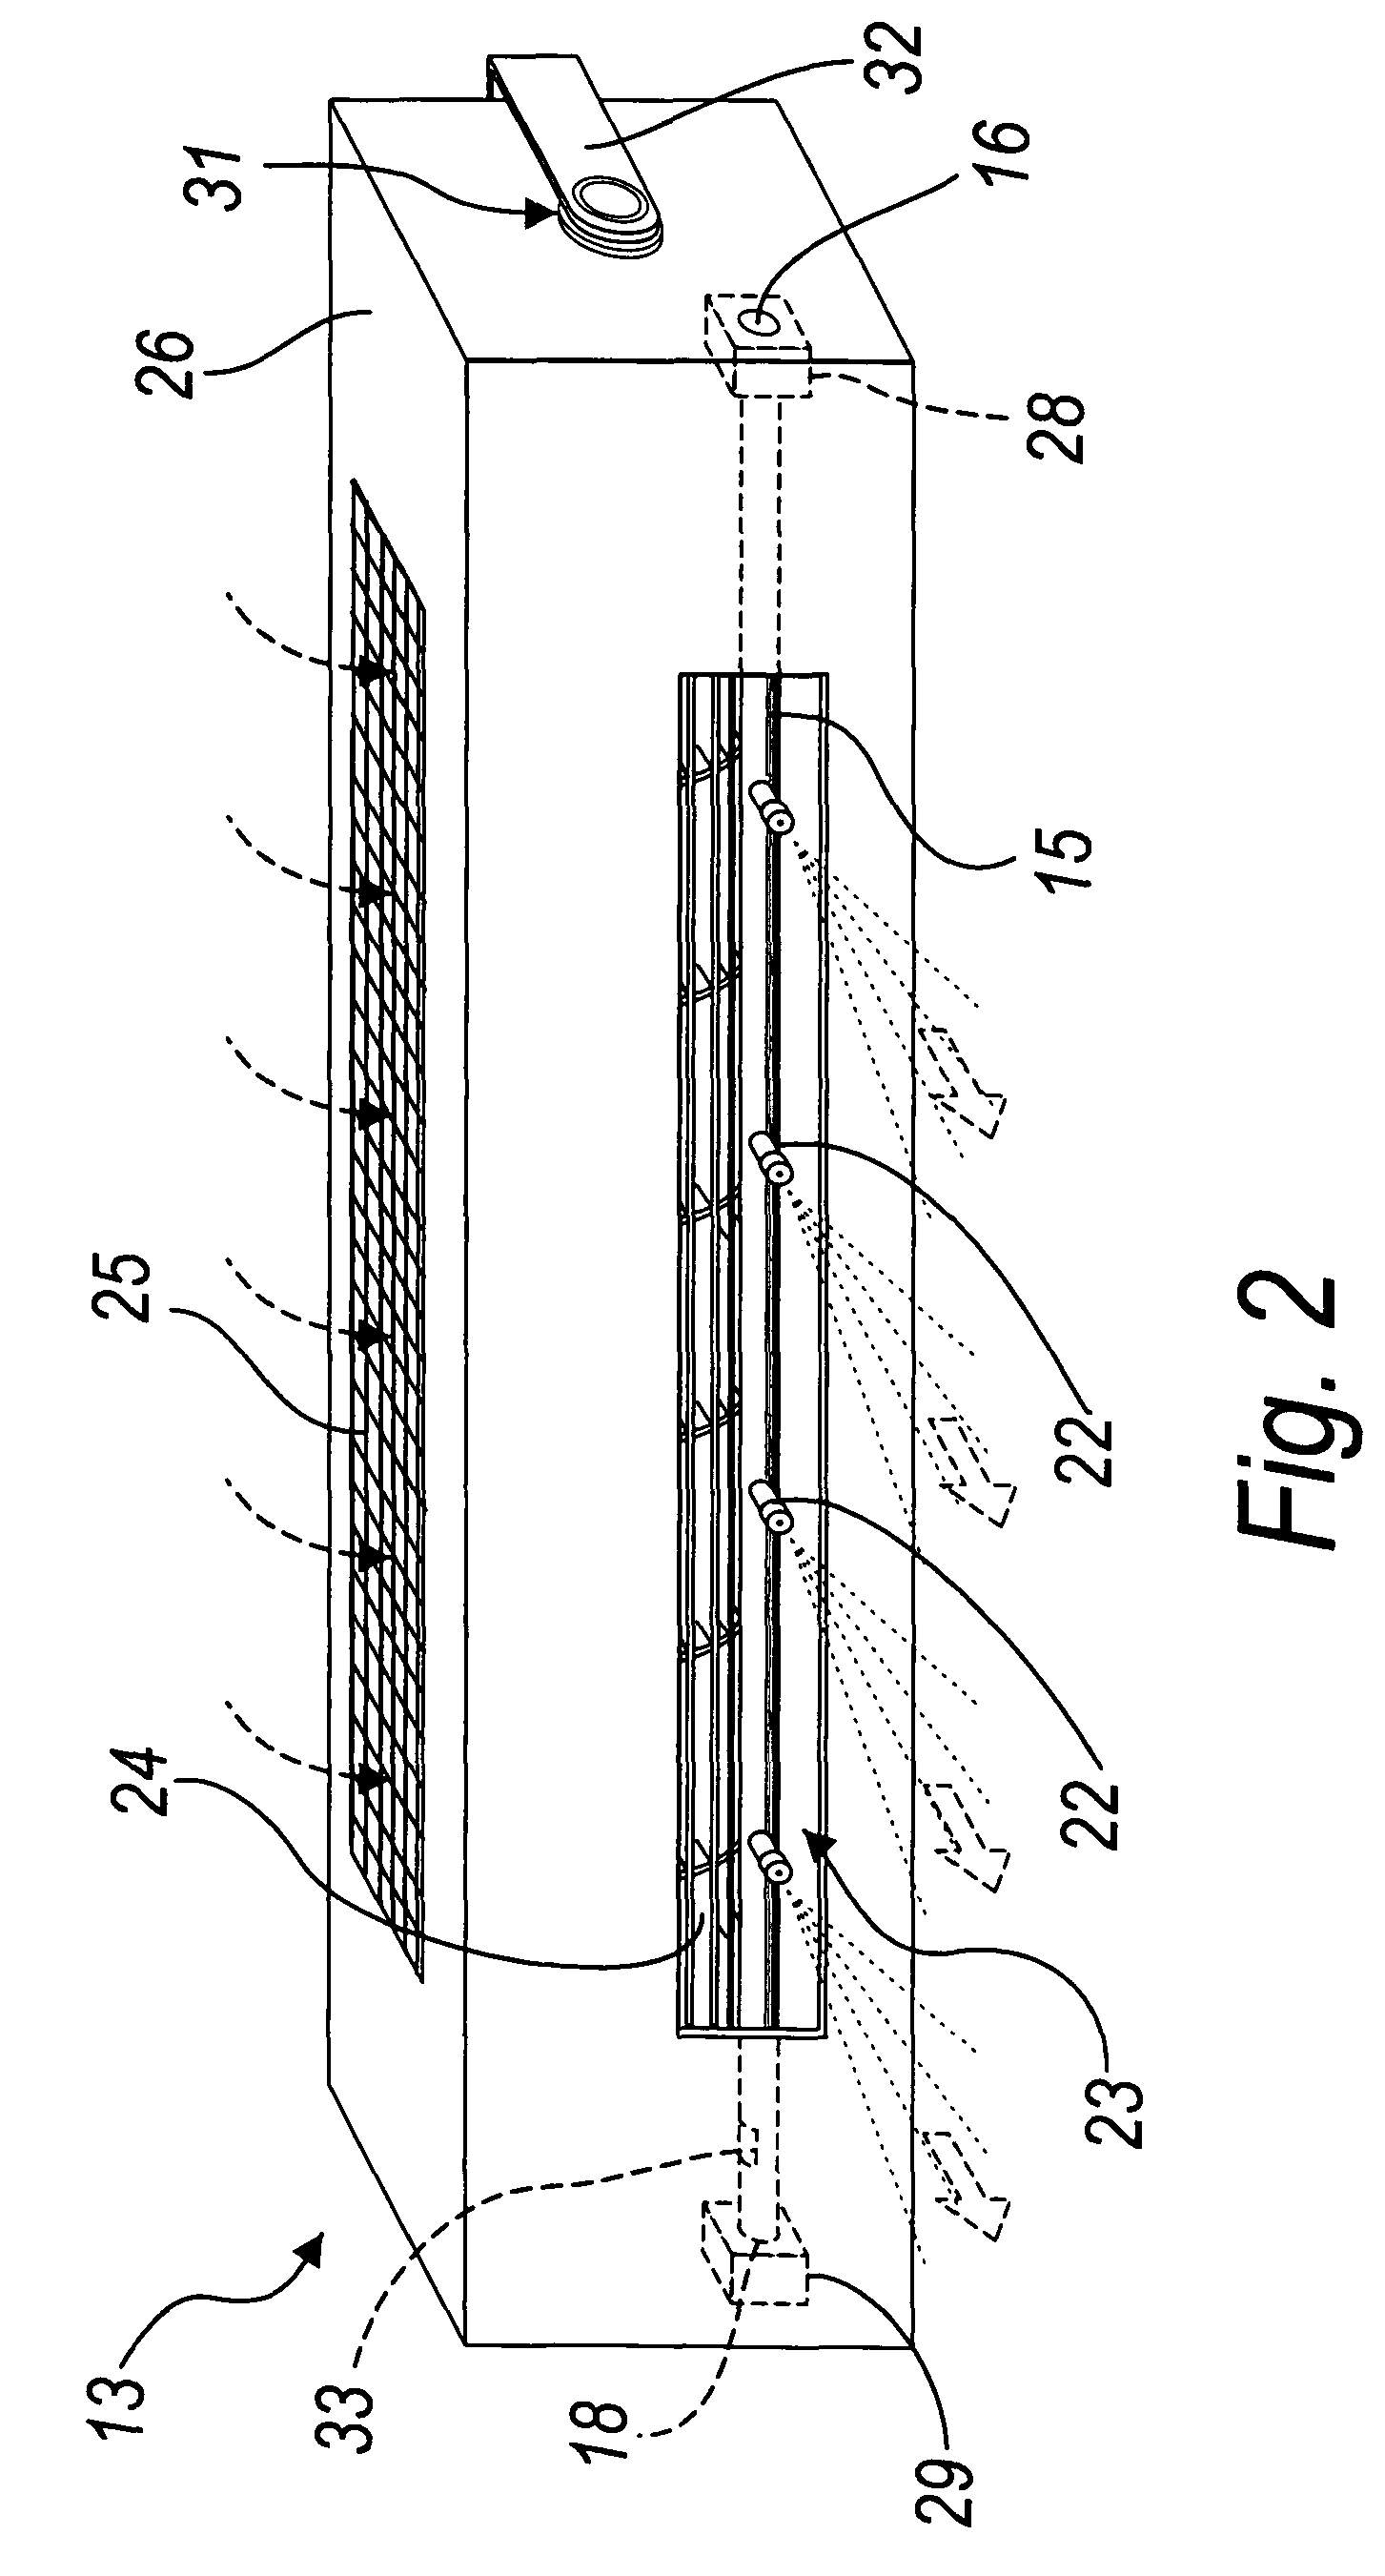 Air humidification system for large enclosed spaces and humidification module usable in such system